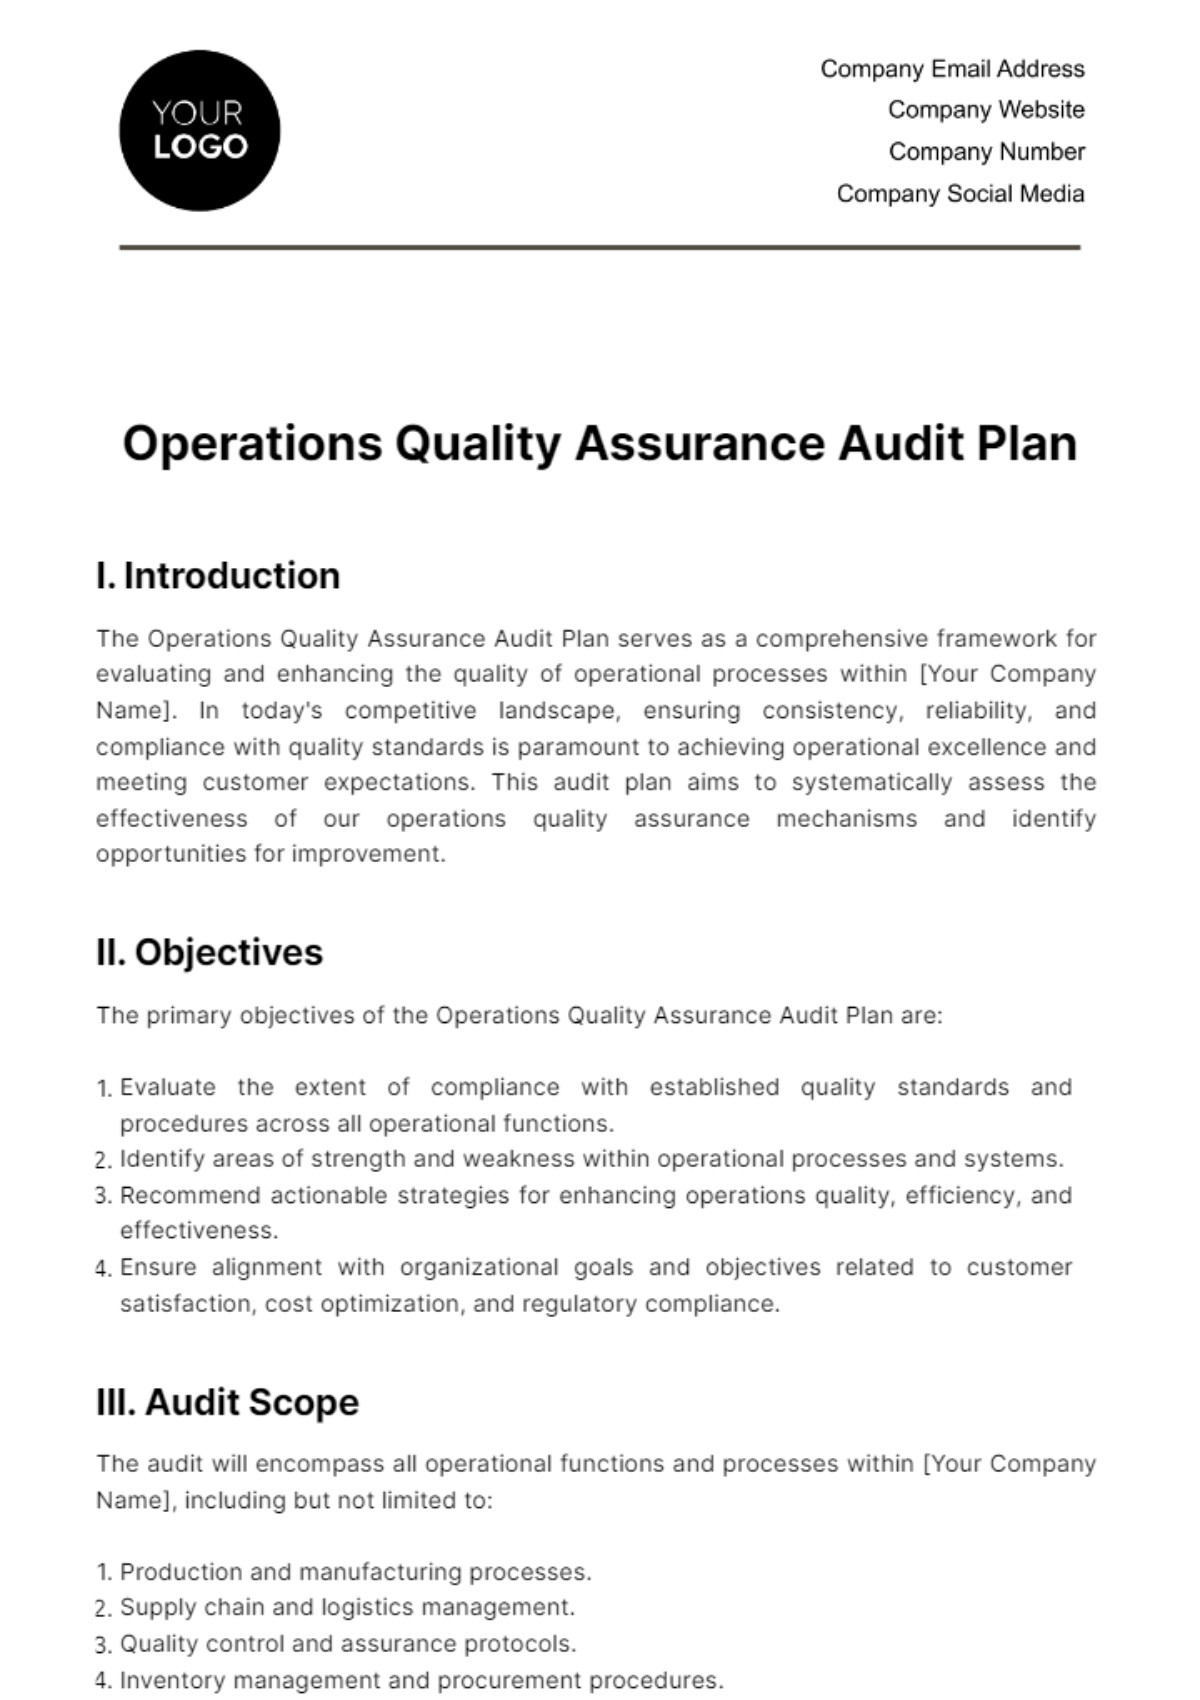 Operations Quality Assurance Audit Plan Template